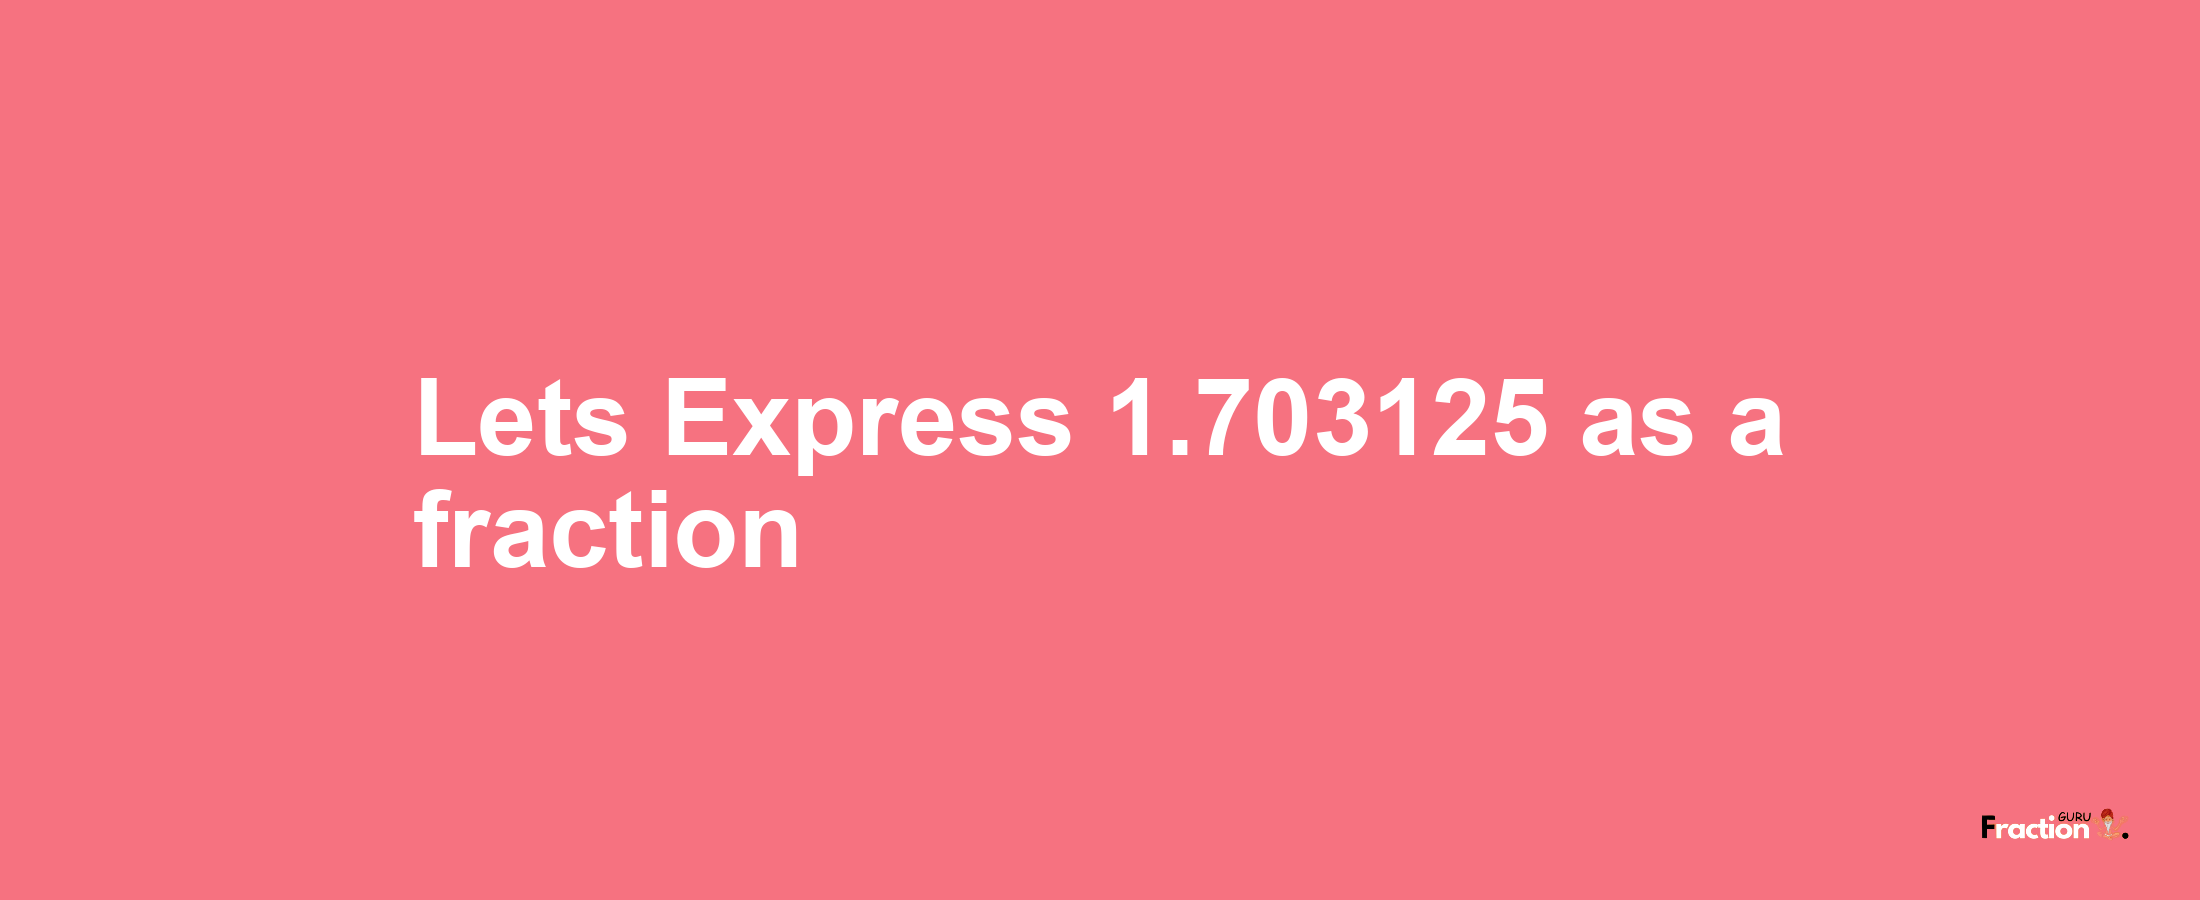 Lets Express 1.703125 as afraction